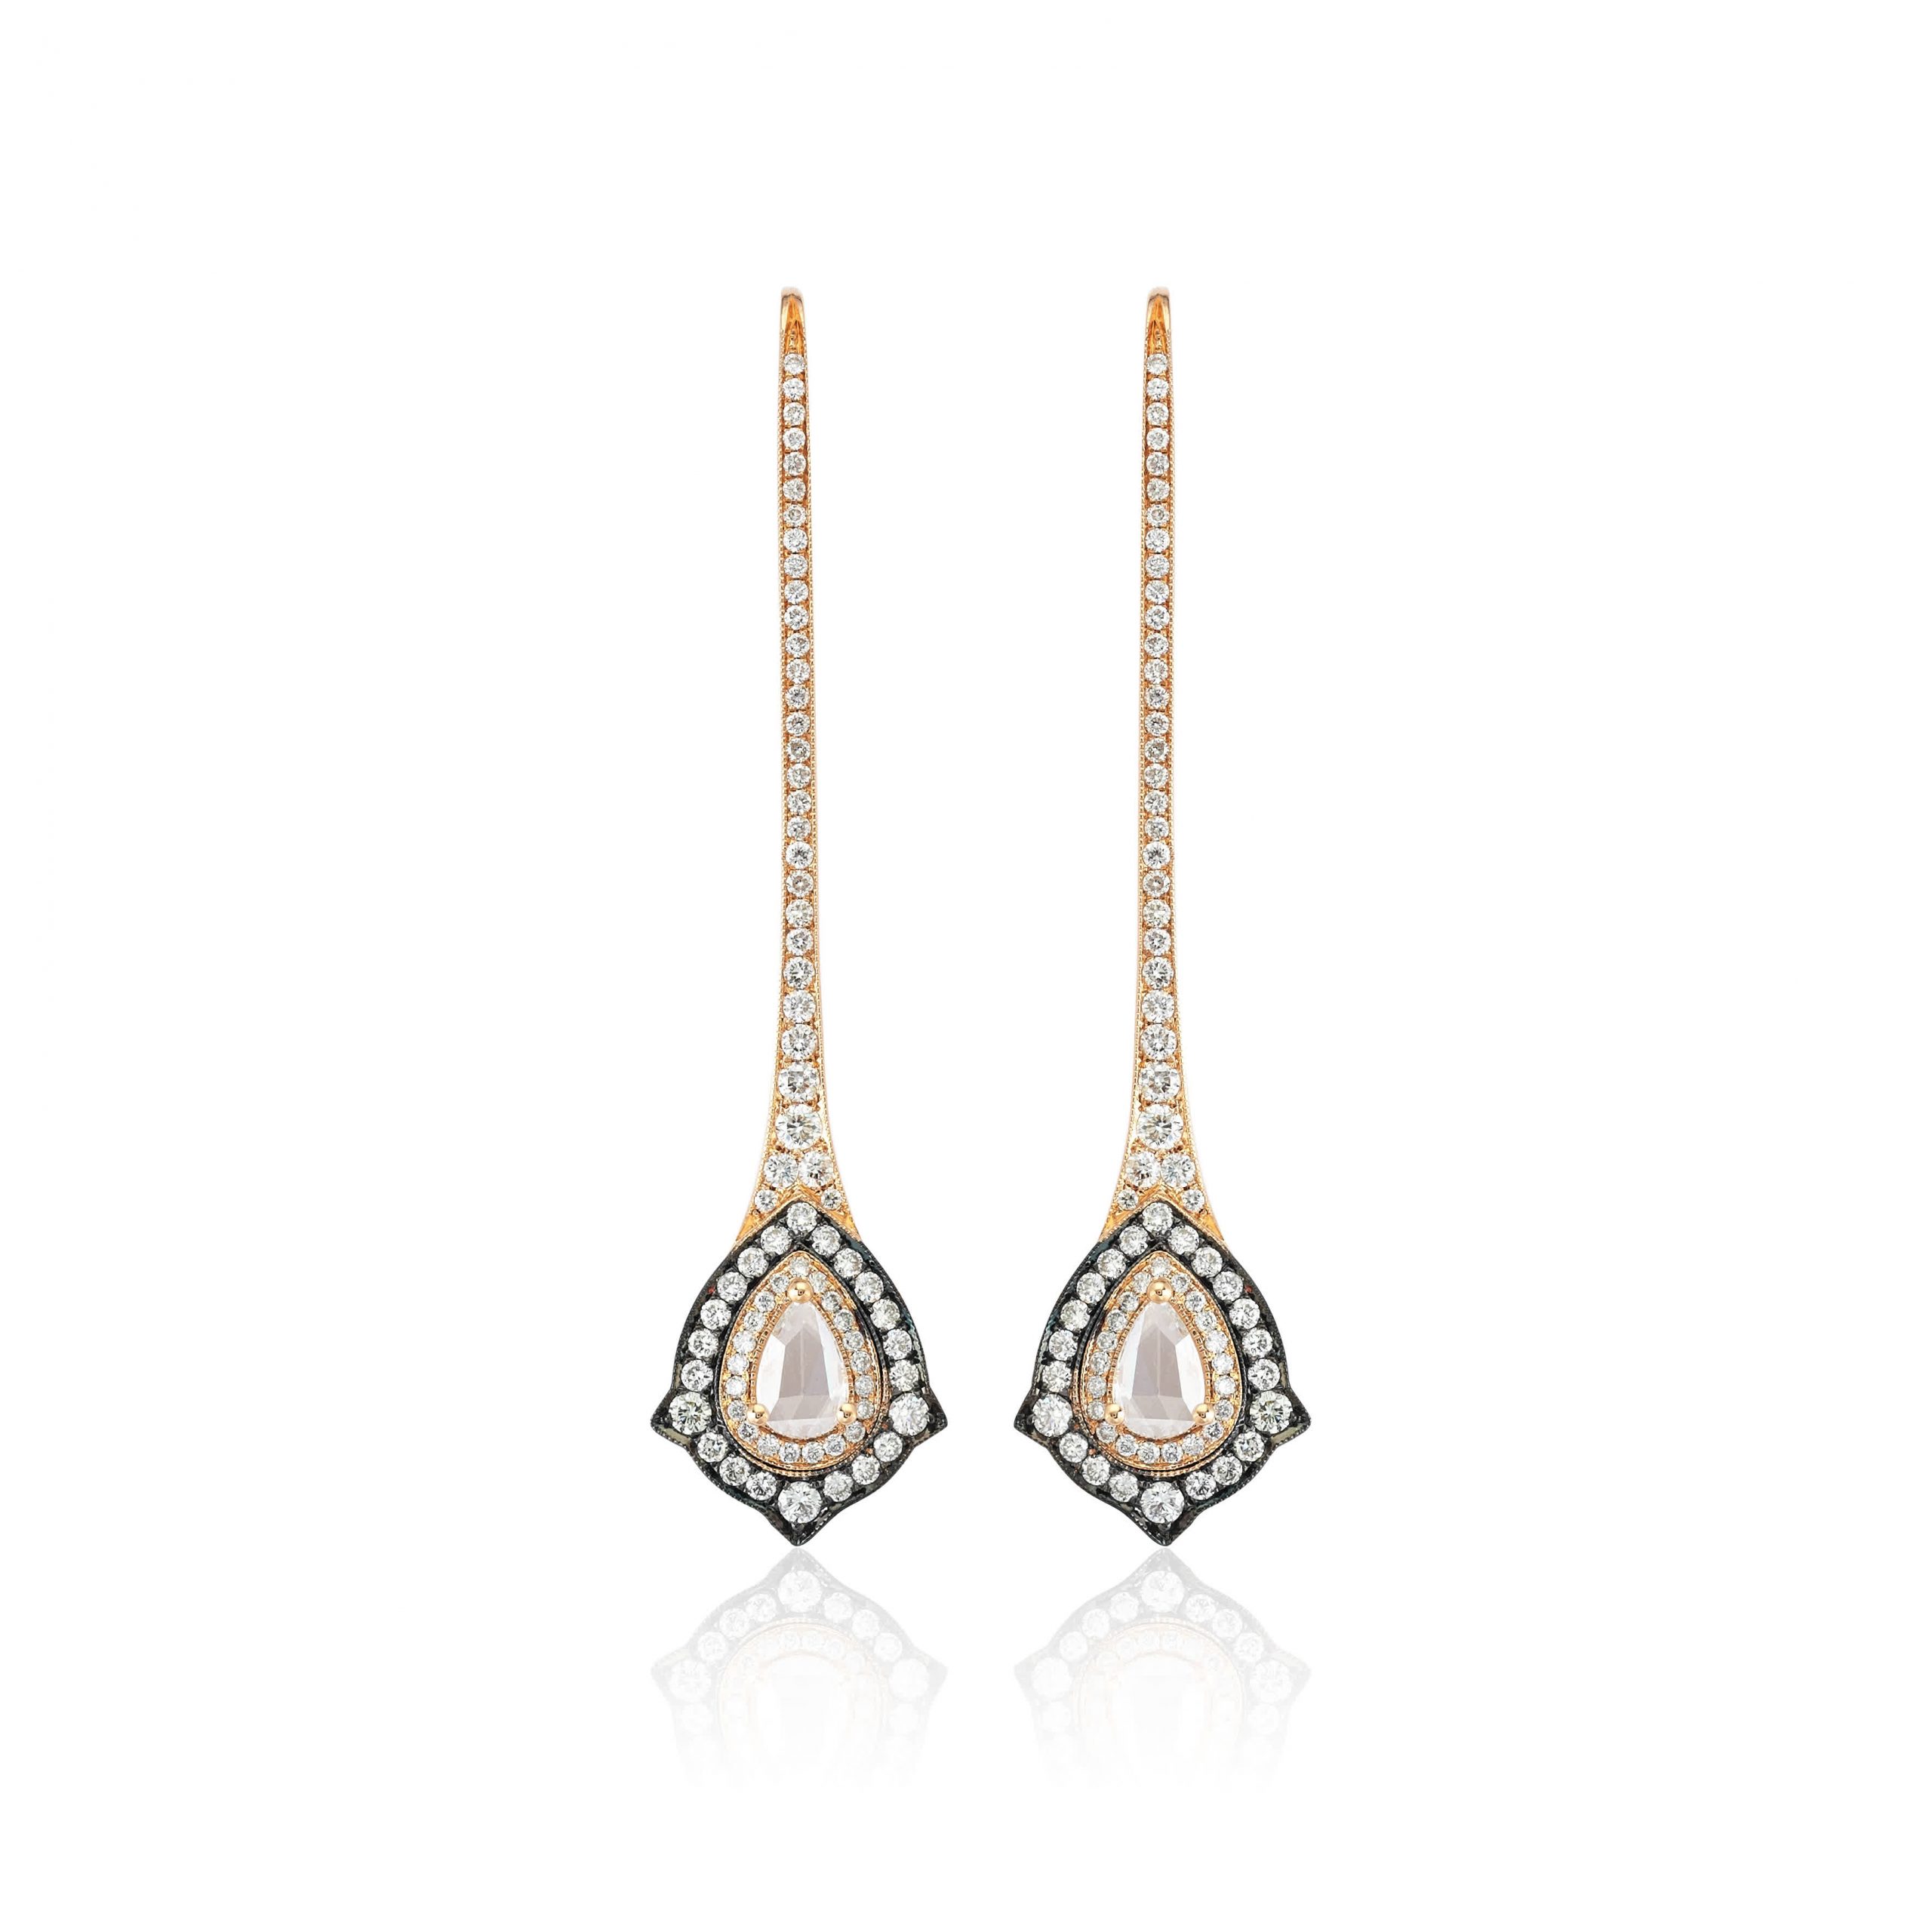 pair of 18ct rose gold Once Upon Time princess long earrings set with 1.22 ct. white diamonds